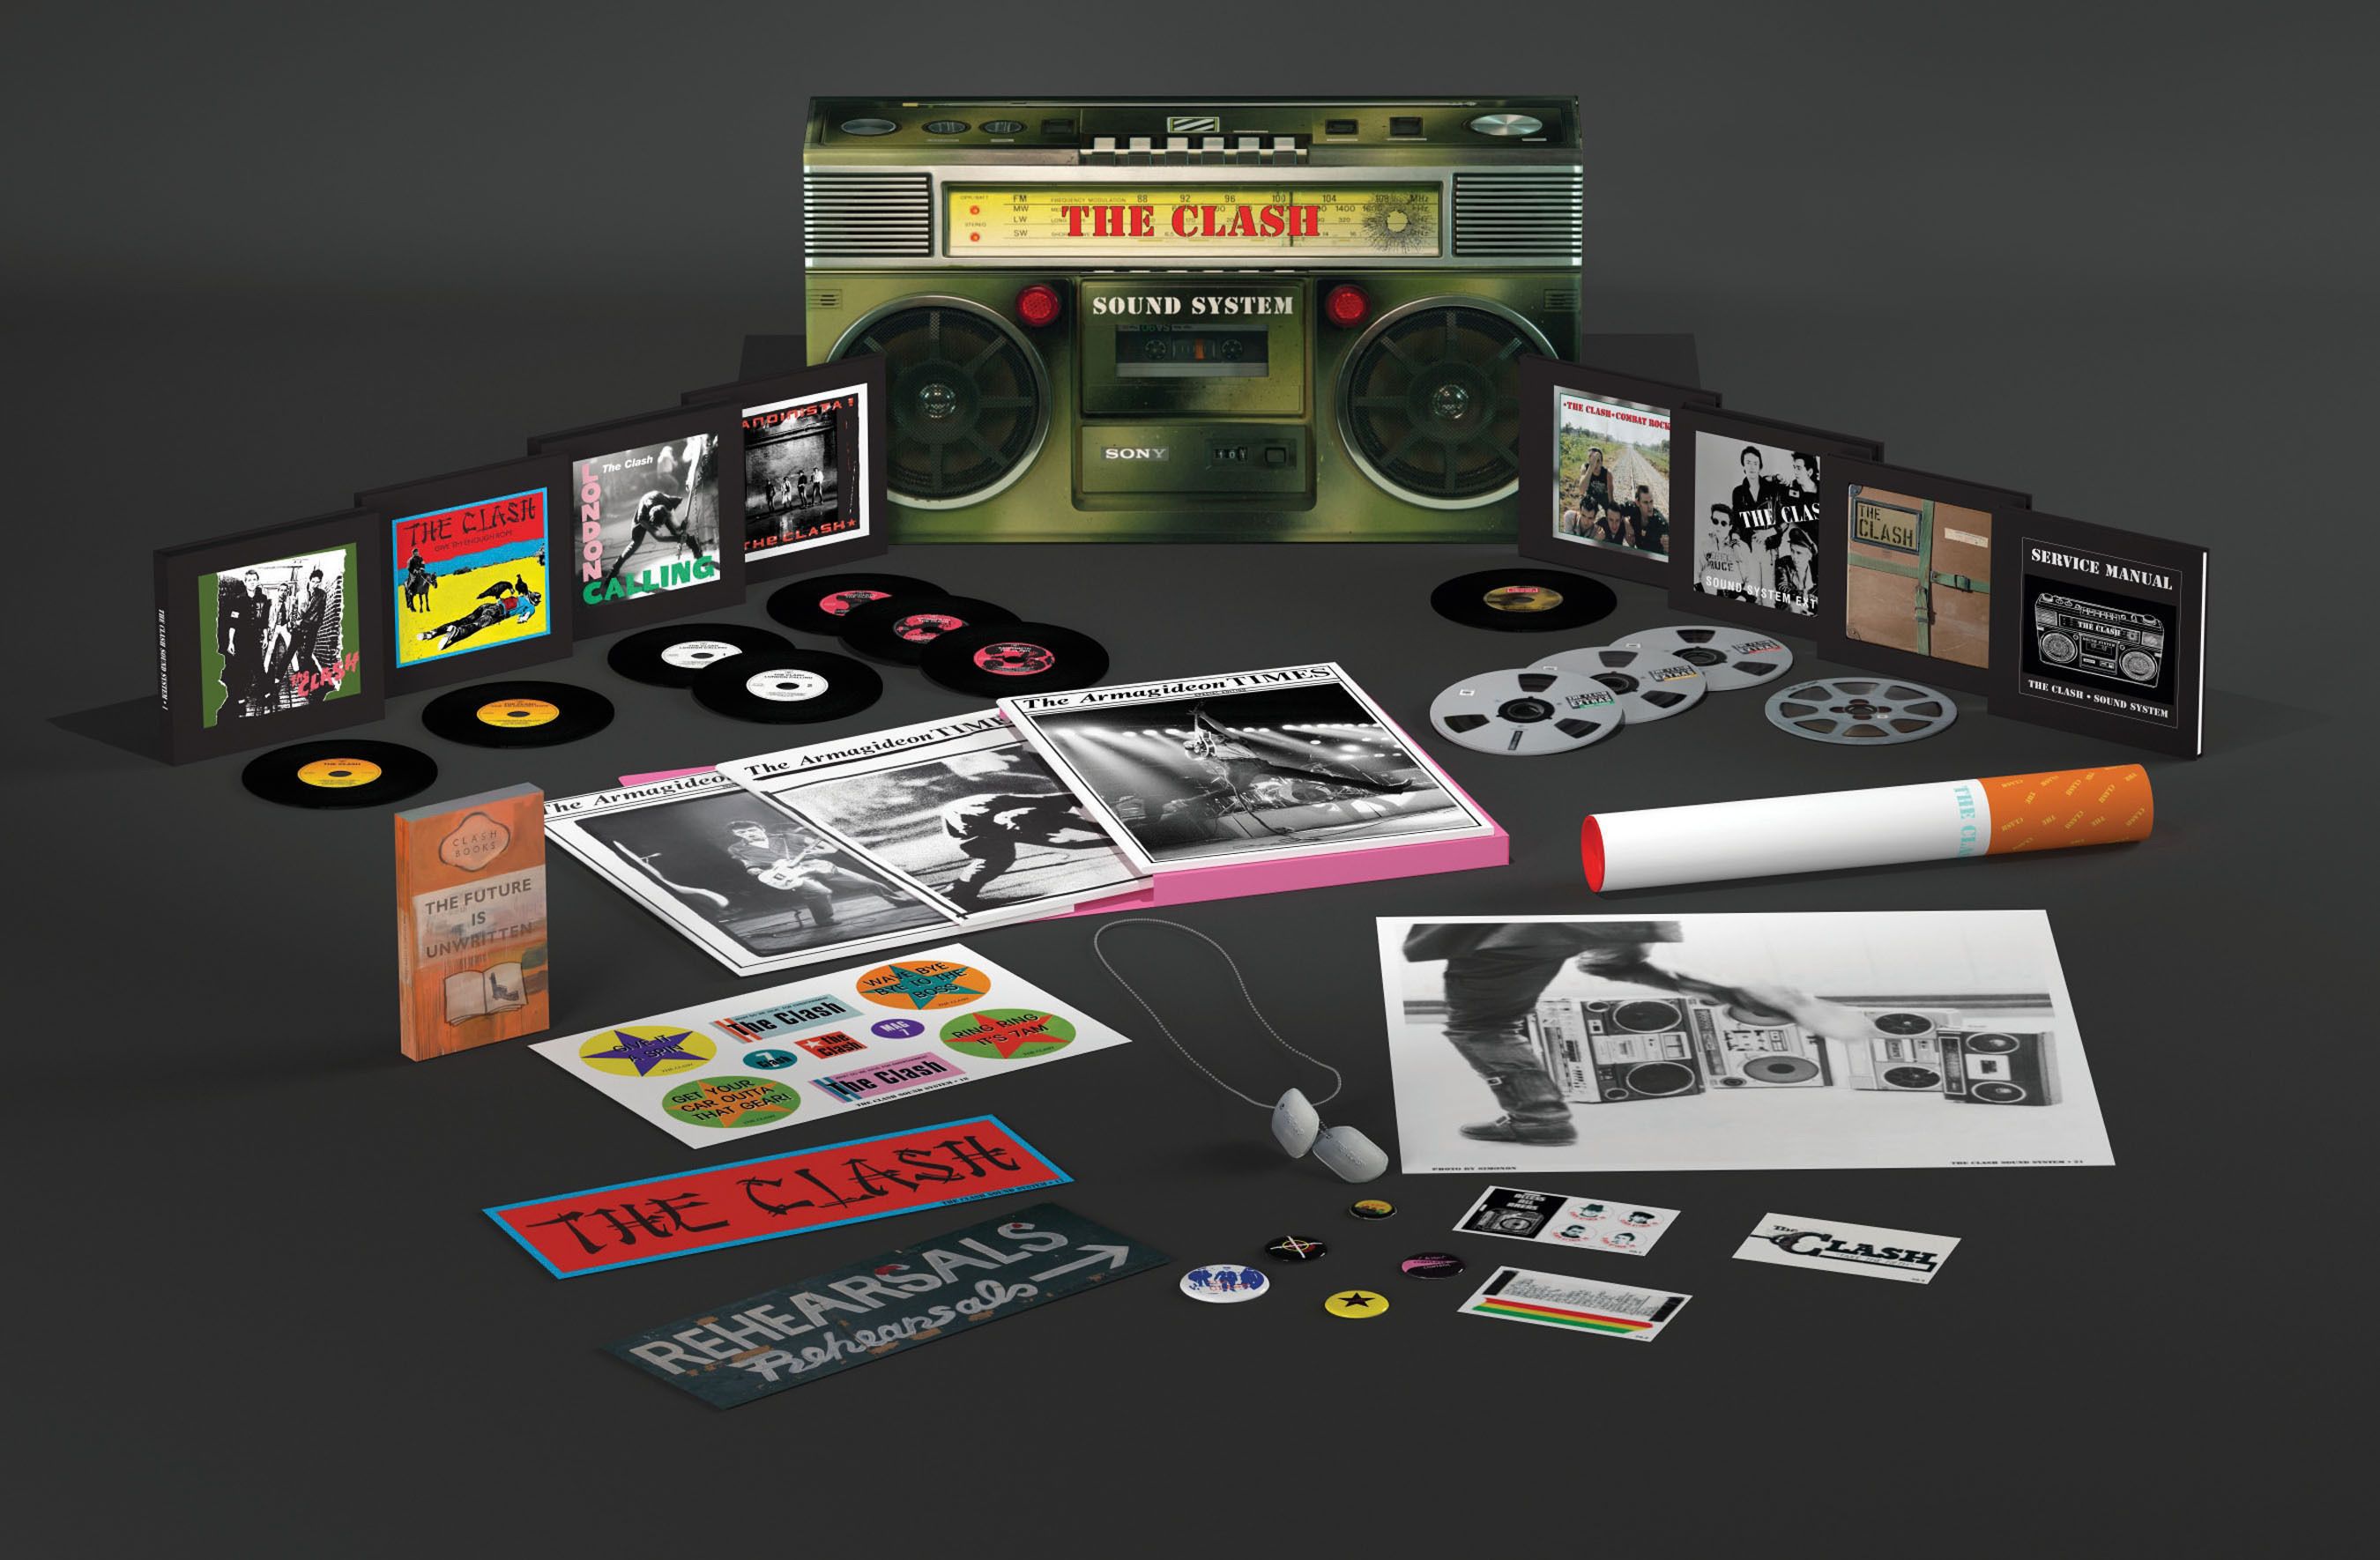 The Clash Announce Deluxe 